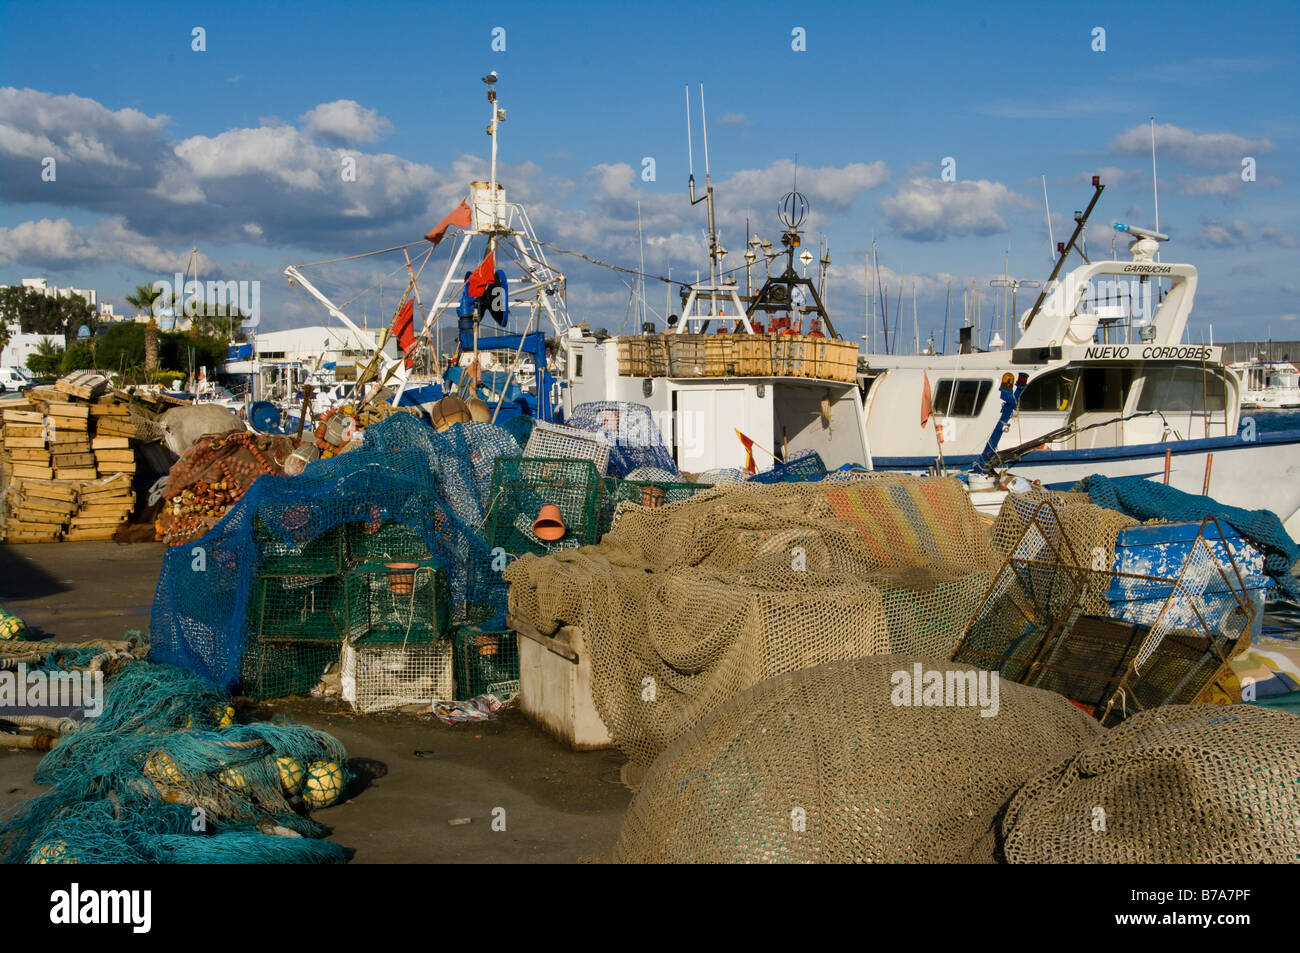 Lobster Pots and Commercial Fishing Nets On The Quayside of Garrucha Harbour Almeria Spain Stock Photo